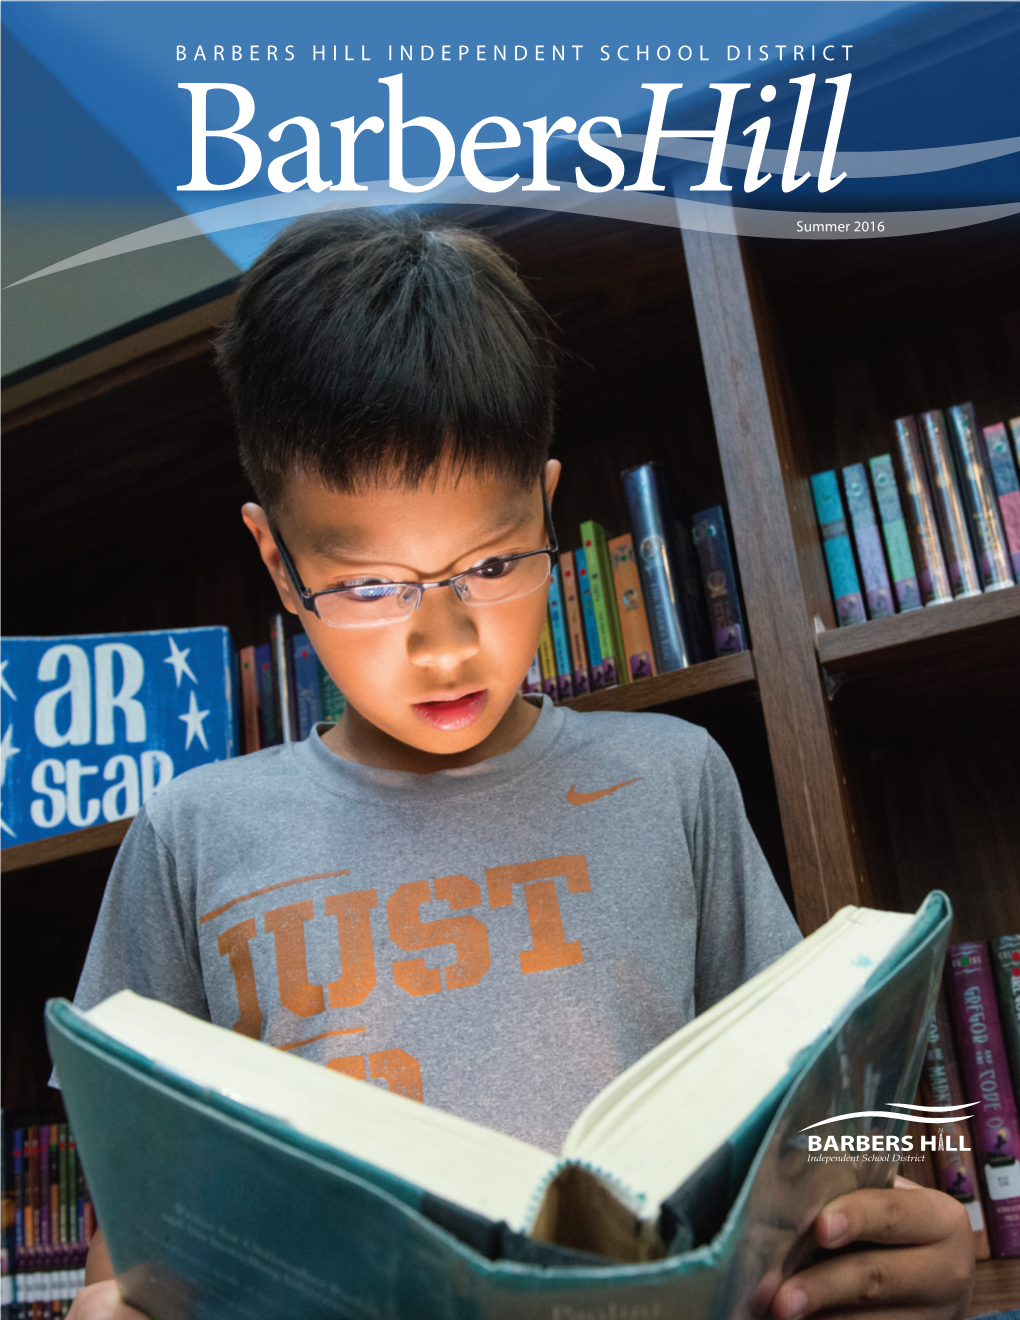 Barbers Hill Independent School District